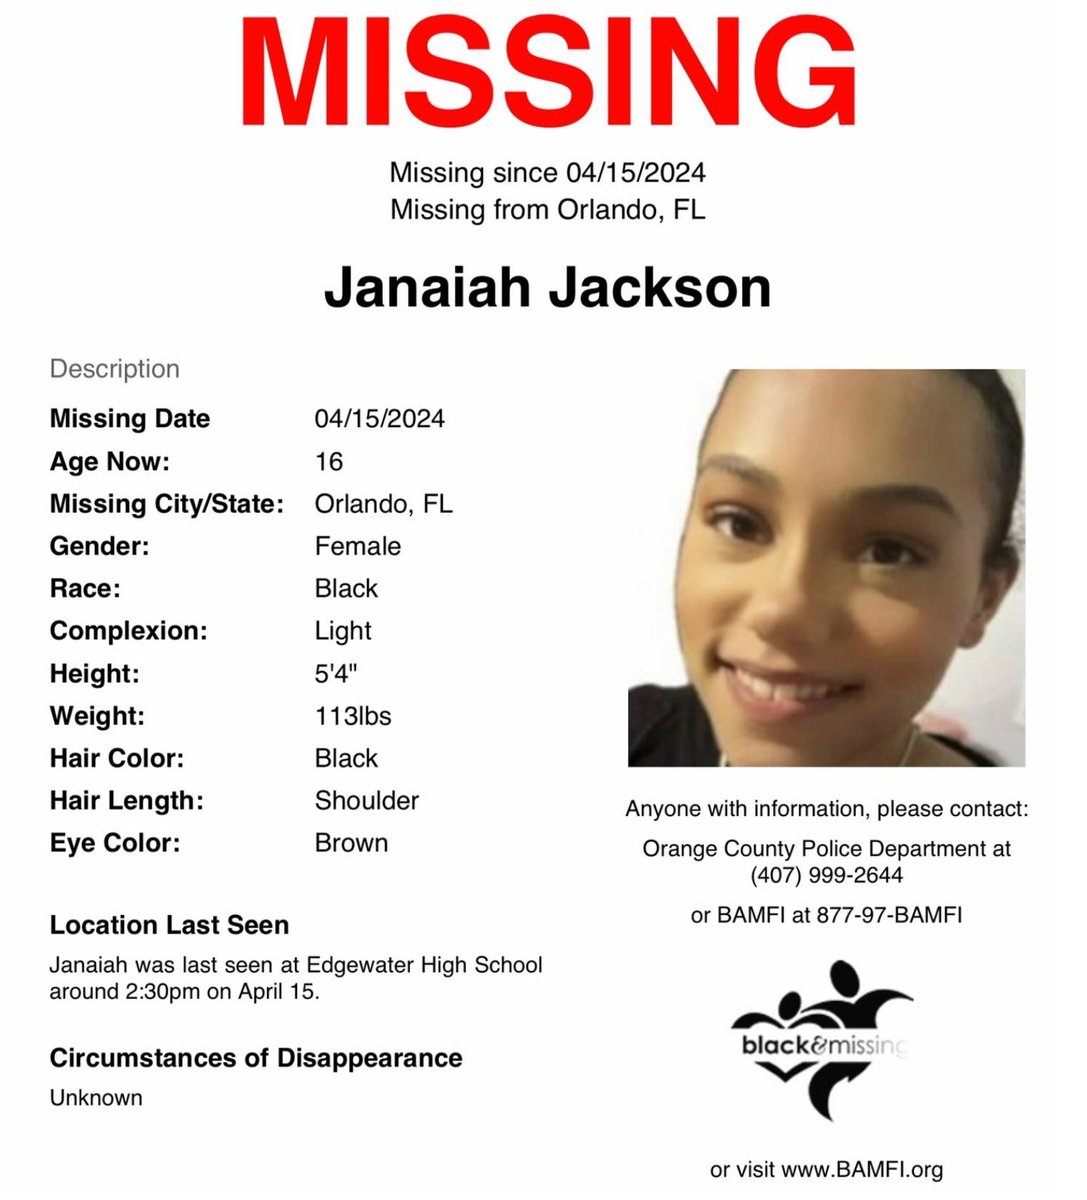 #JanaiahJackson #Missing since 4/15/24.
Black with light complextion, she is 16, 5'4, 113 lbs has shoulder length black hair & brown eyes.

When Ja'Naiah was last seen, she was wearing black sweatpants, a black hoodie, white & black shoes.

Orlando PD 321-235-5300.
#MissingTeen